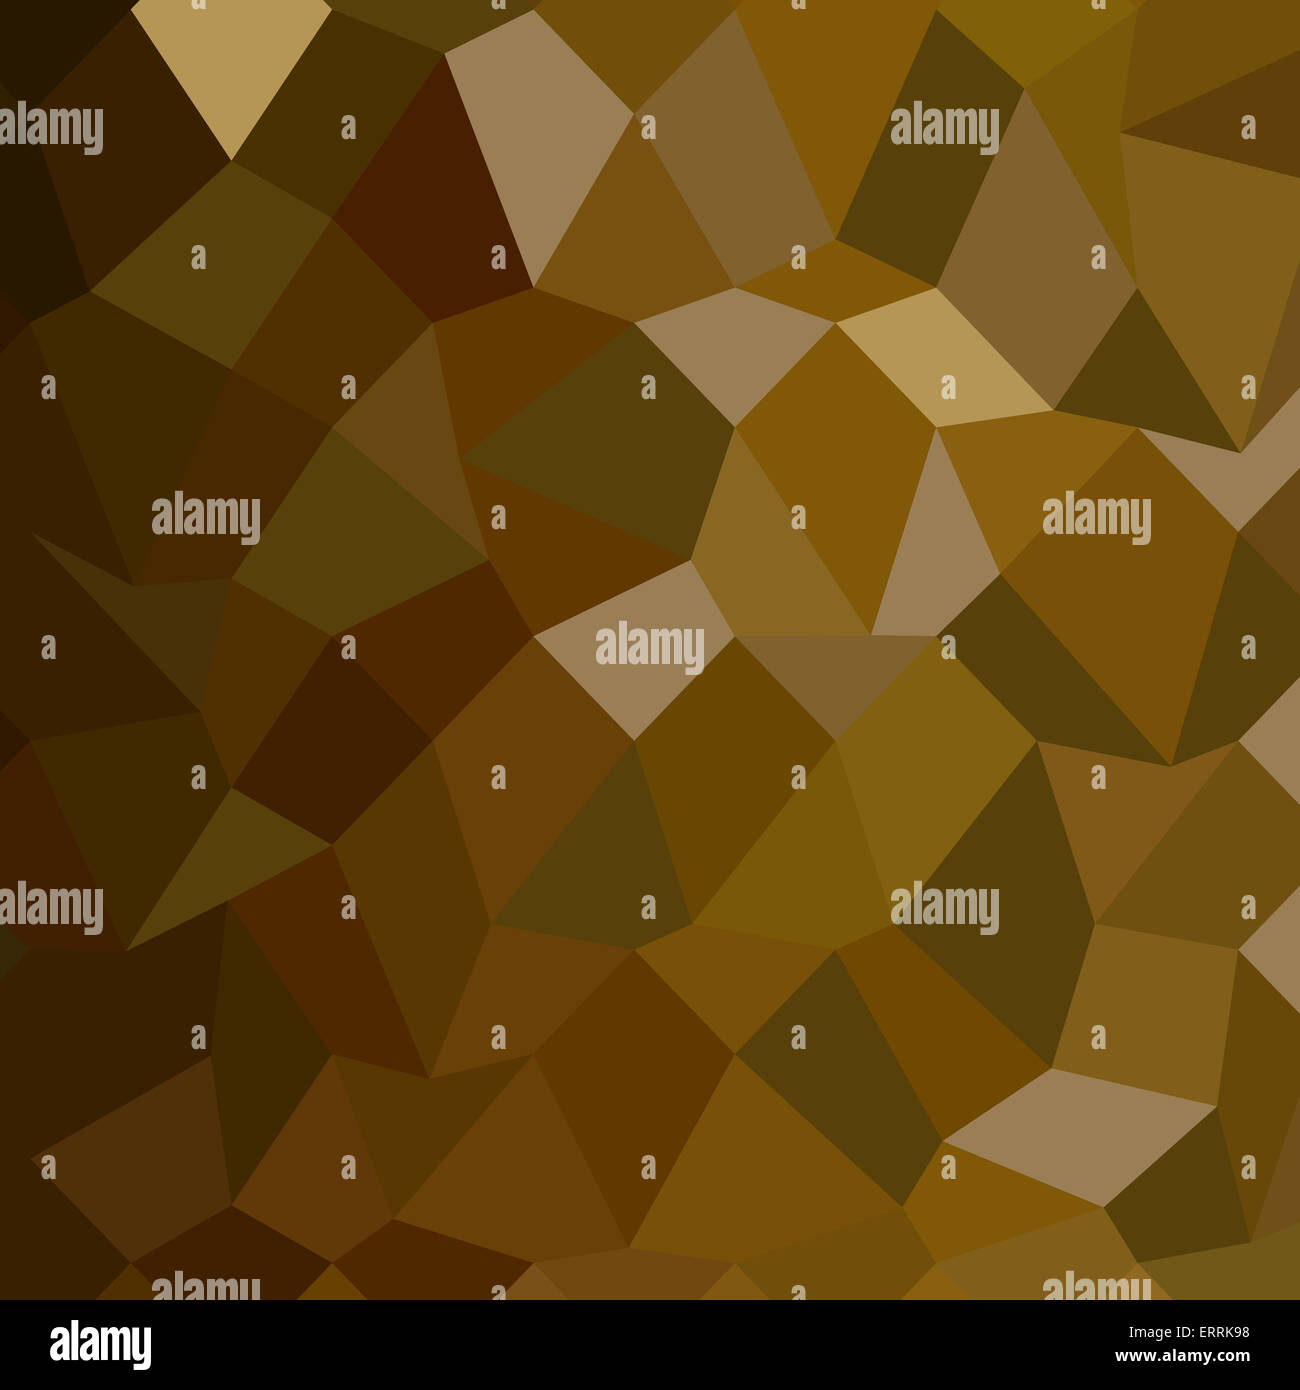 Low polygon style illustration of olive drab abstract geometric background. Stock Photo